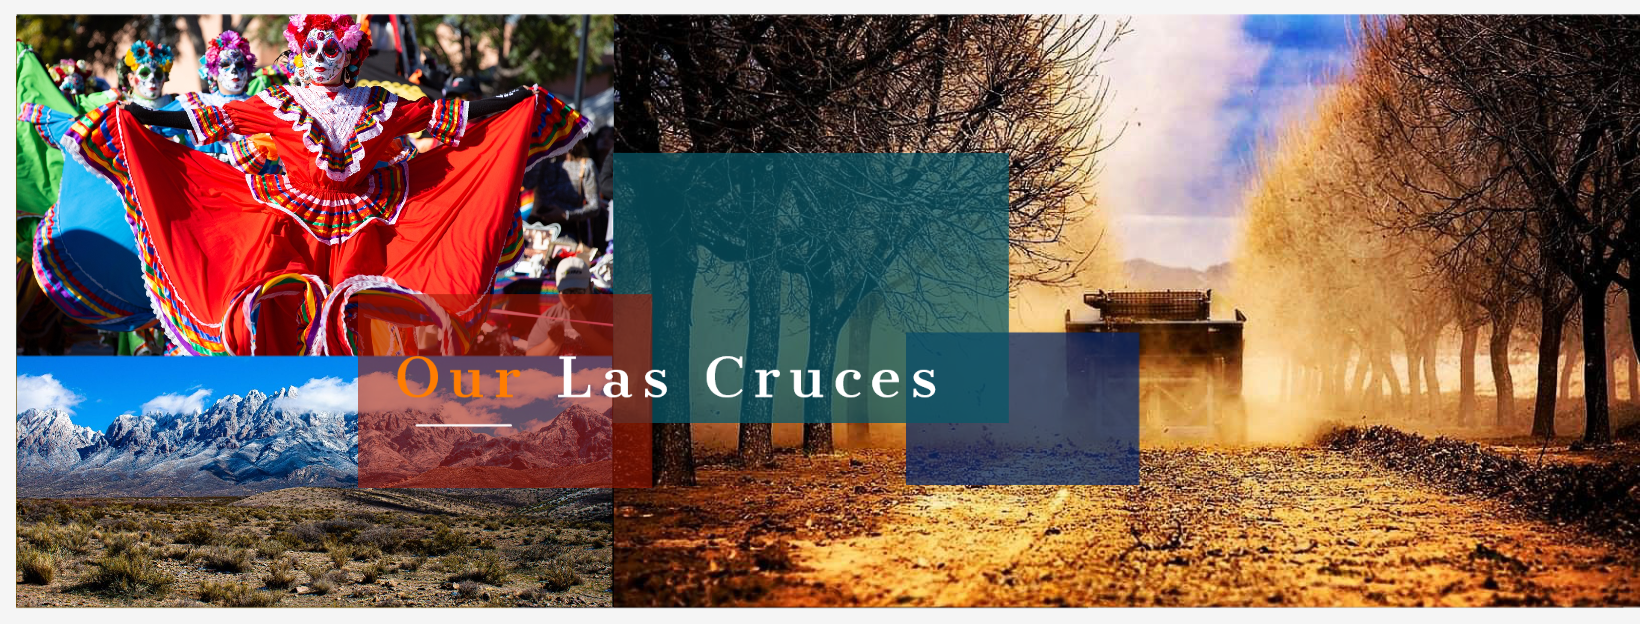 Our Las Cruces